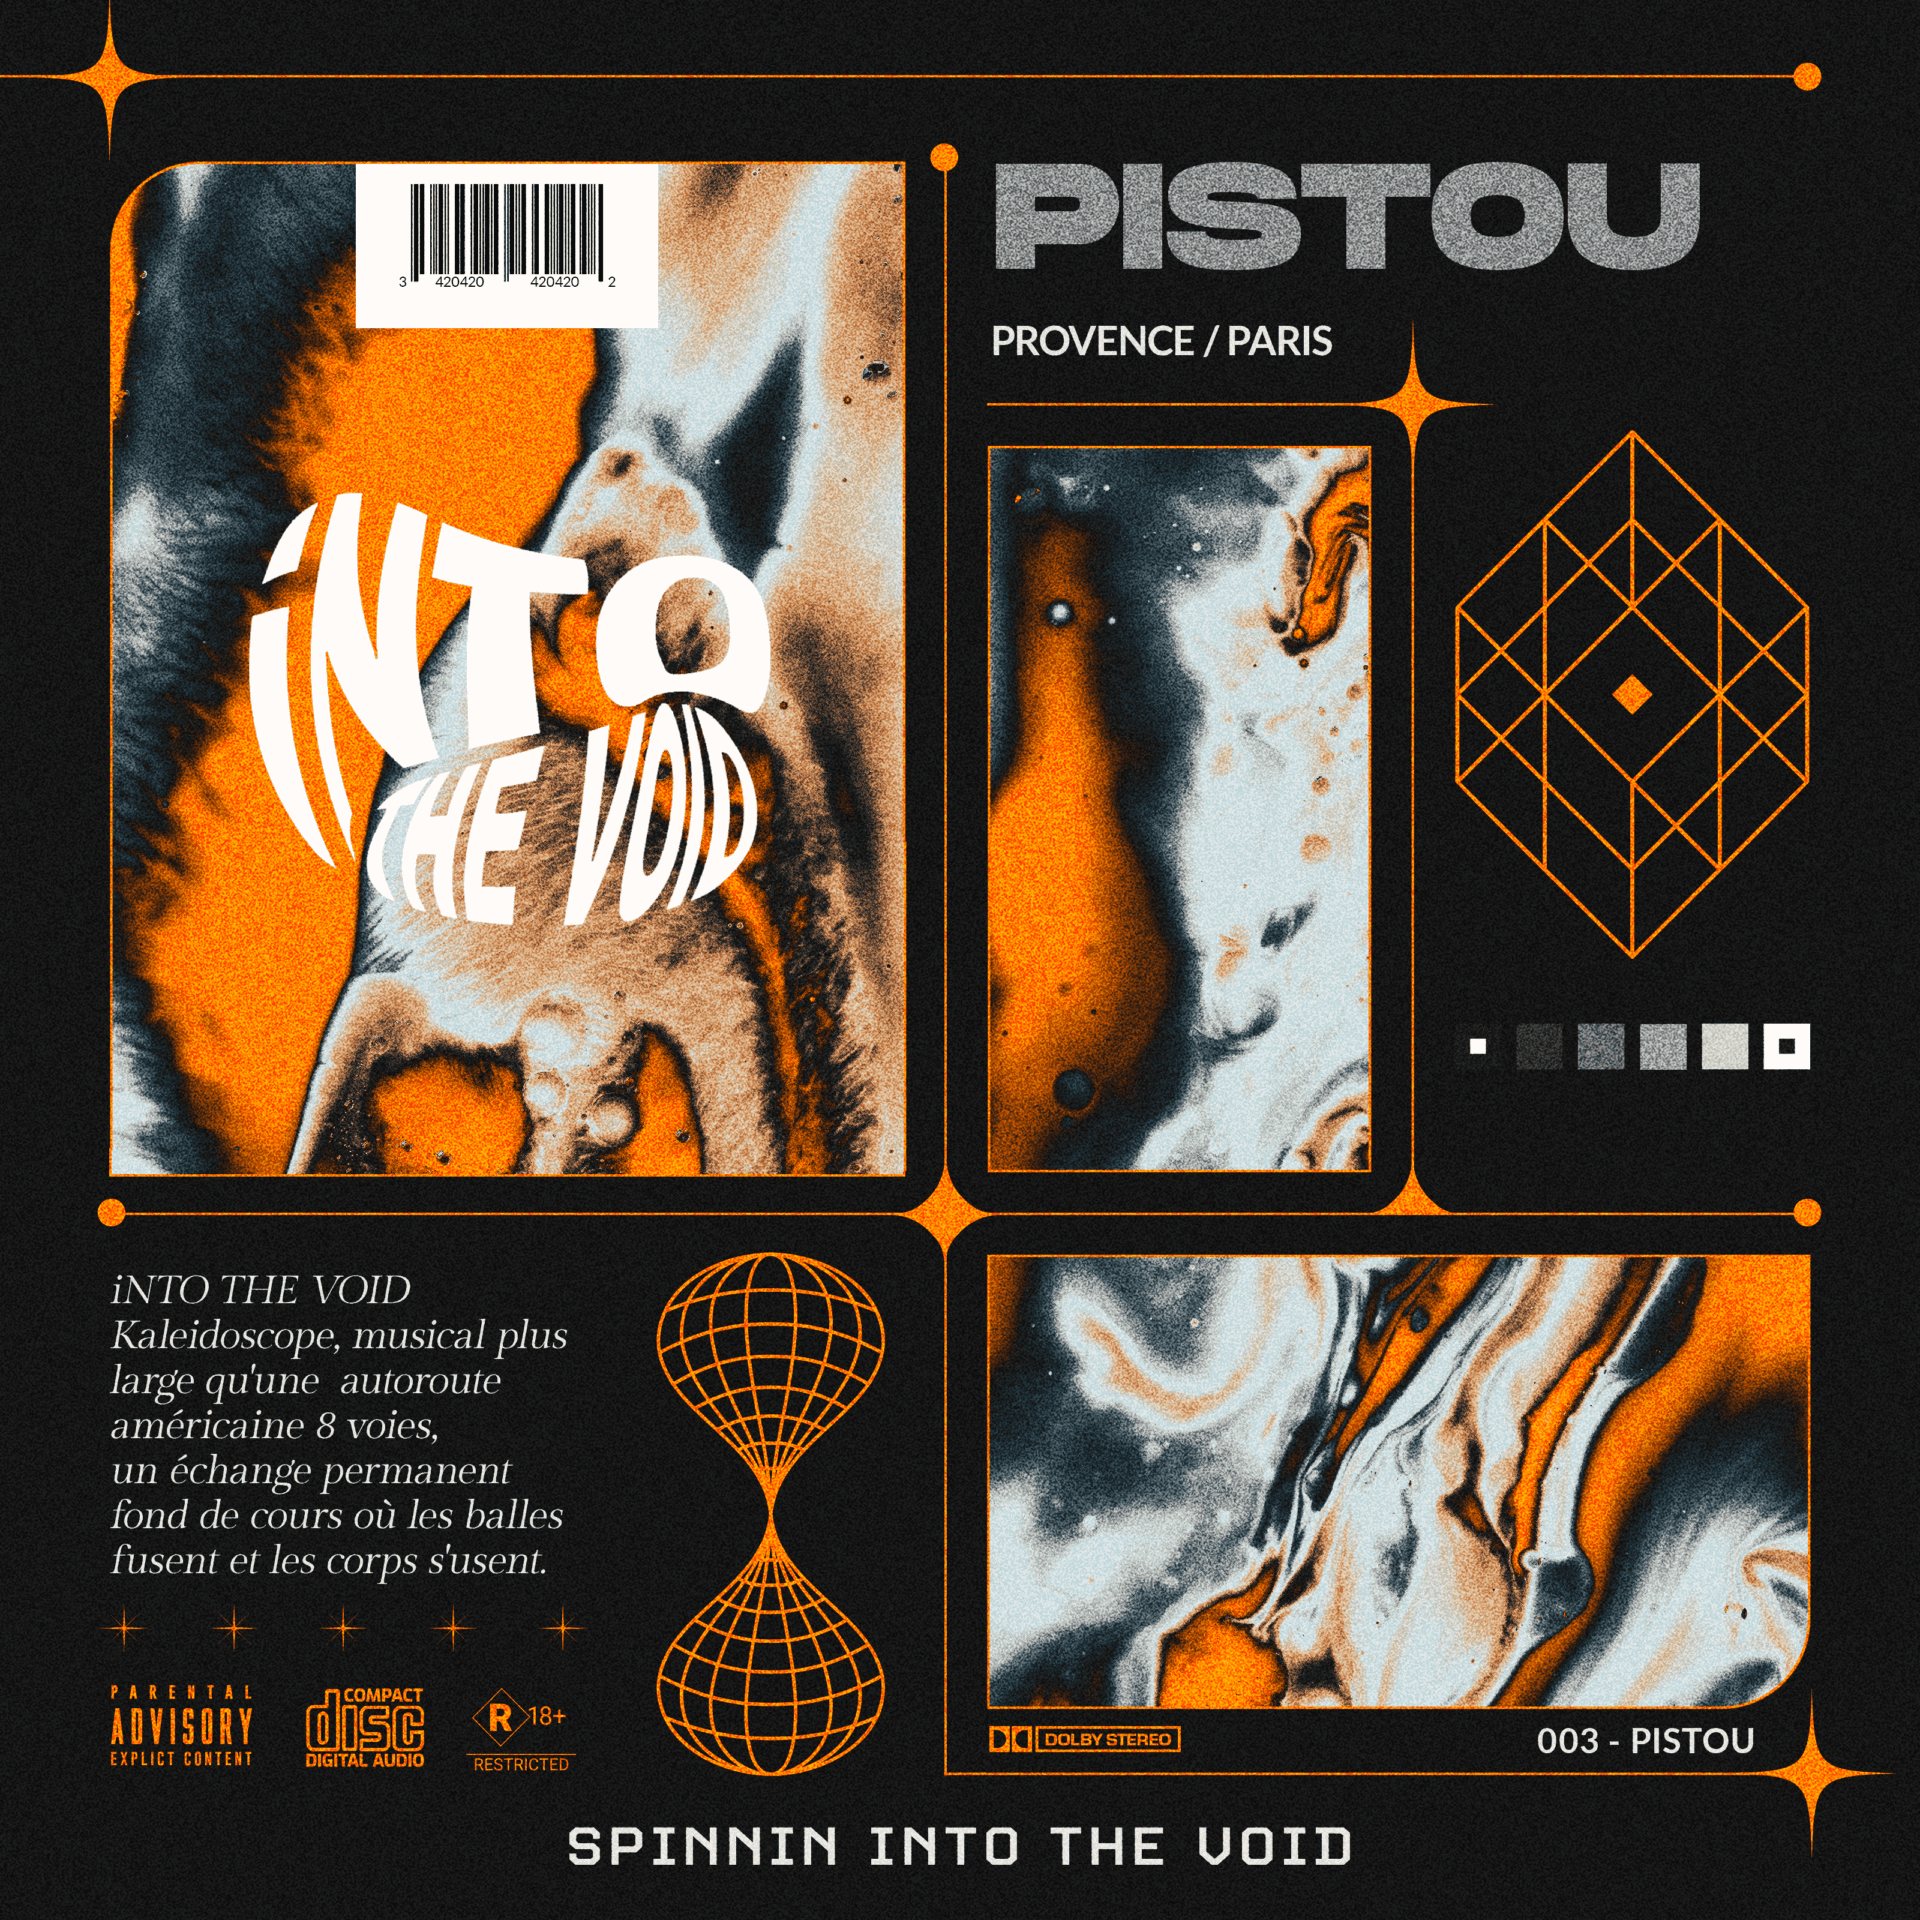 Cover spinnin into the void 003 Pistou